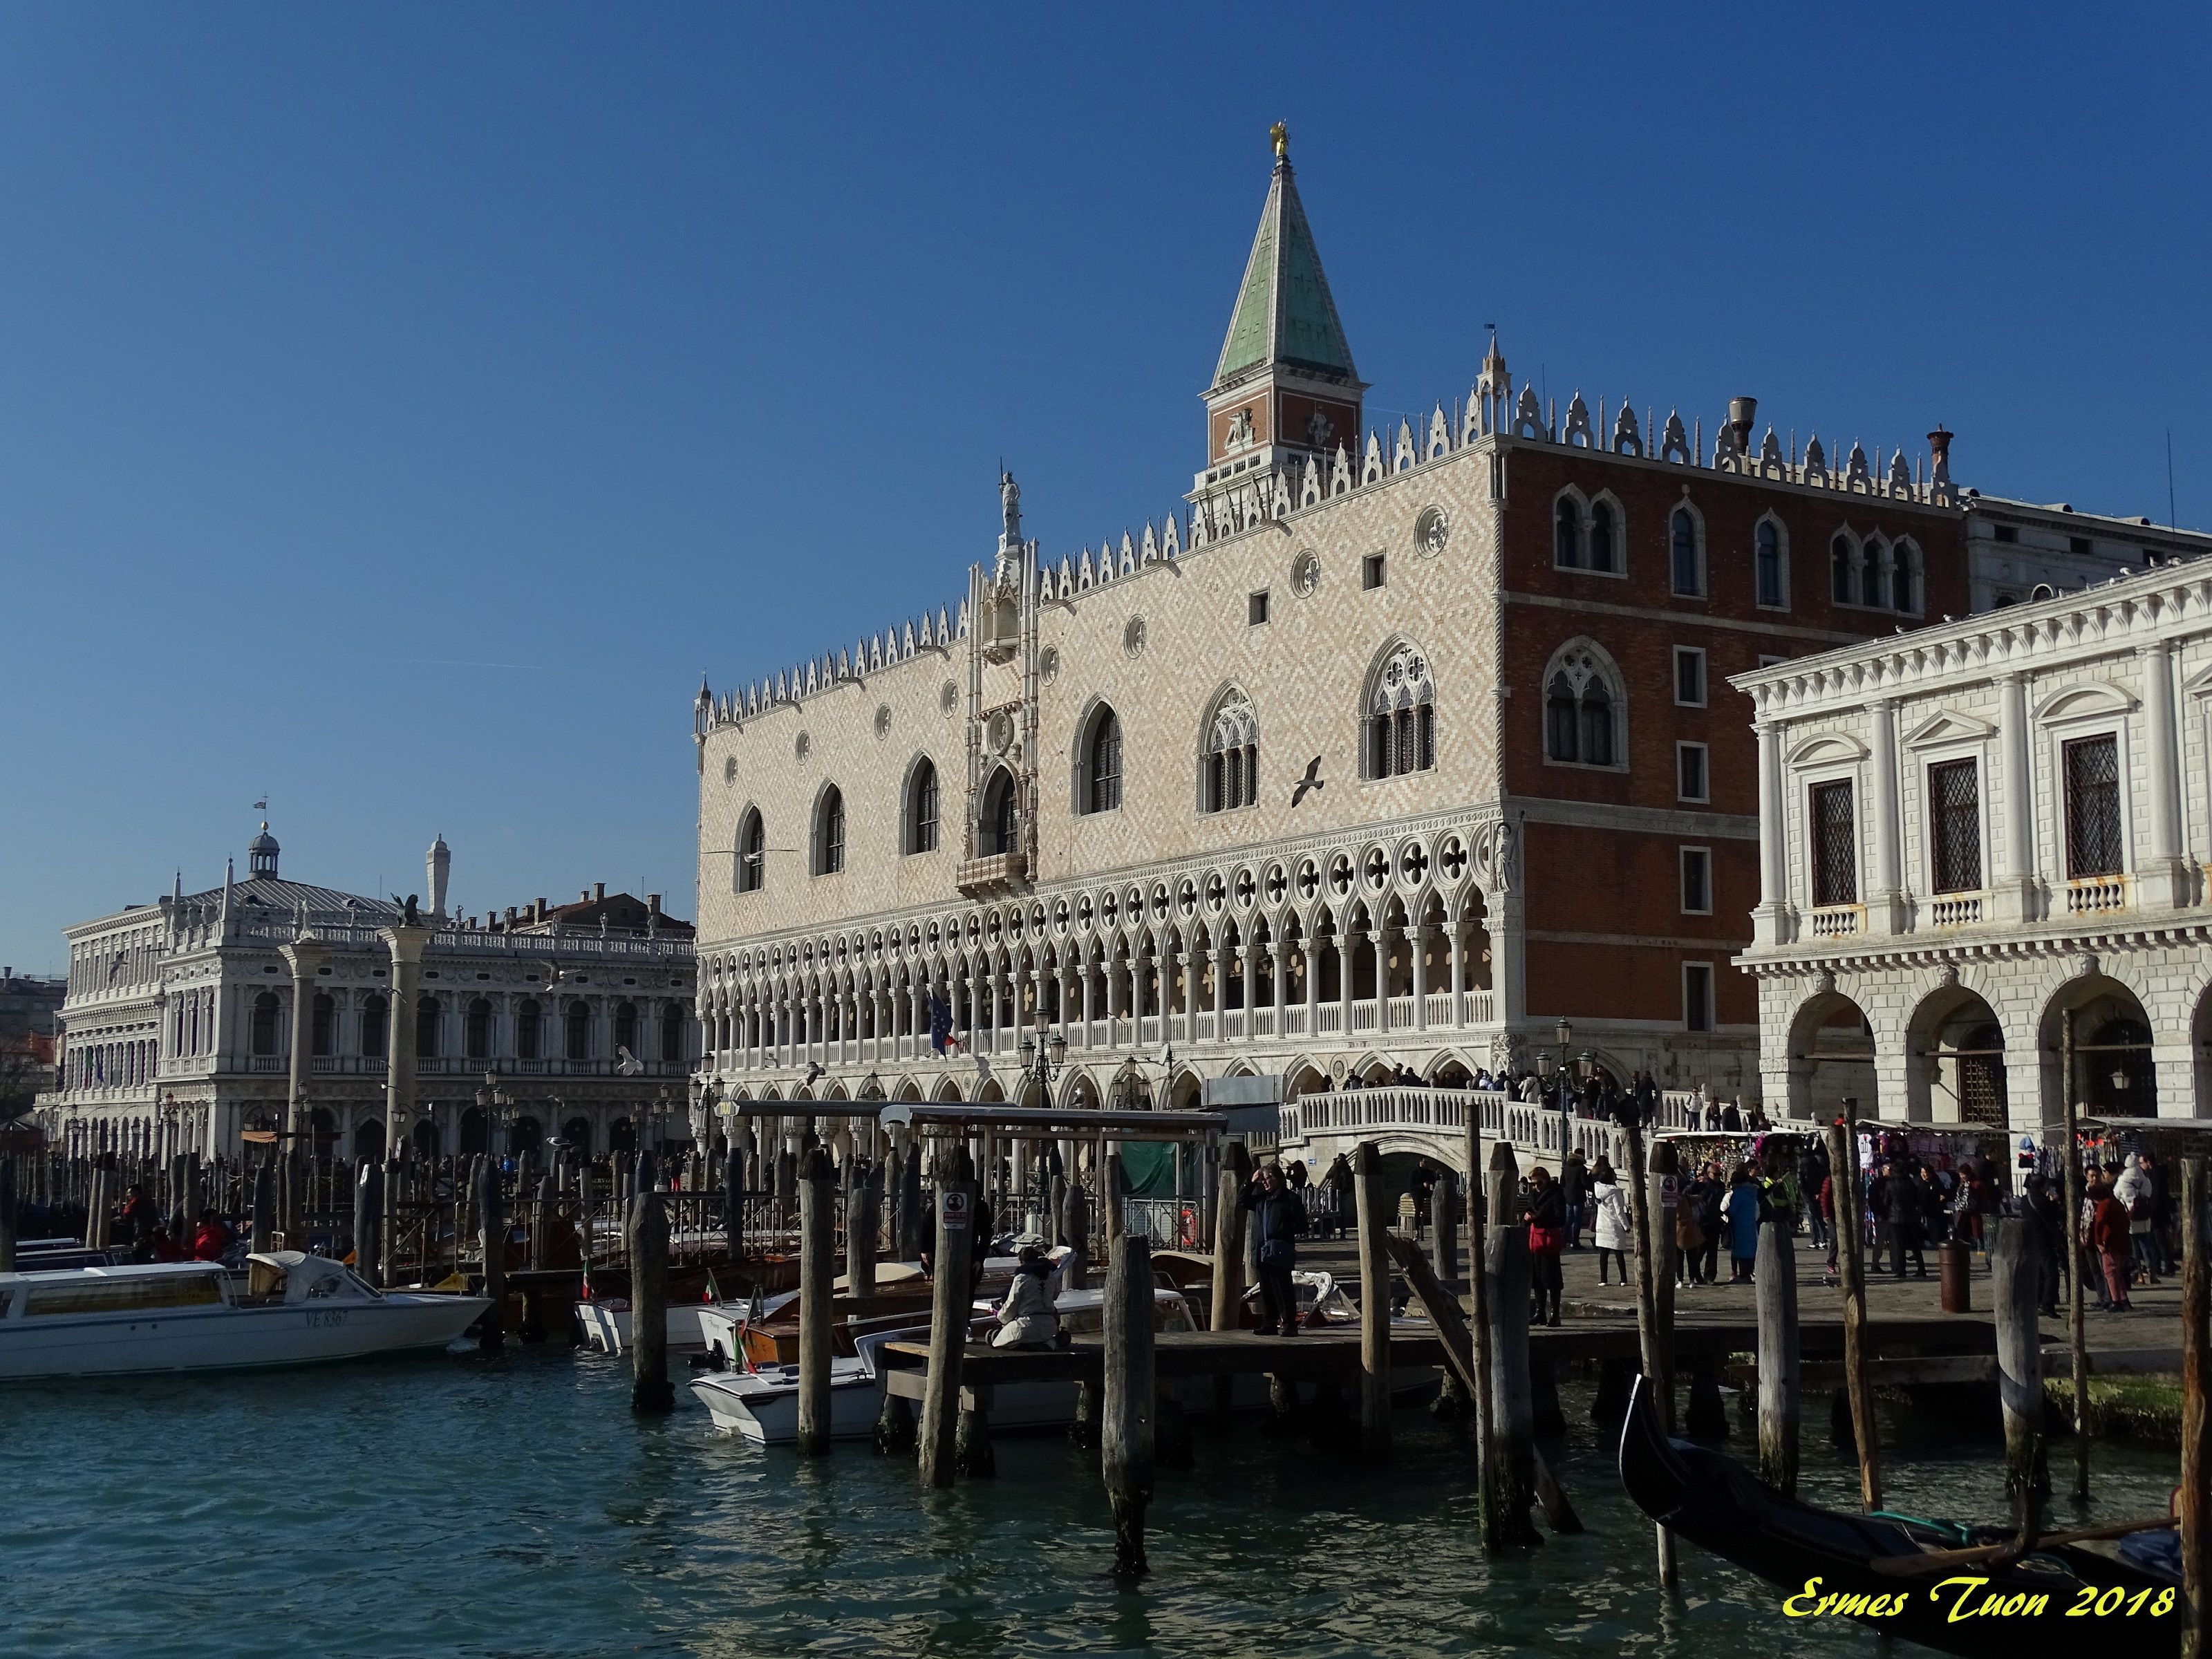 Caption: View of Palazzo Ducale - Venice